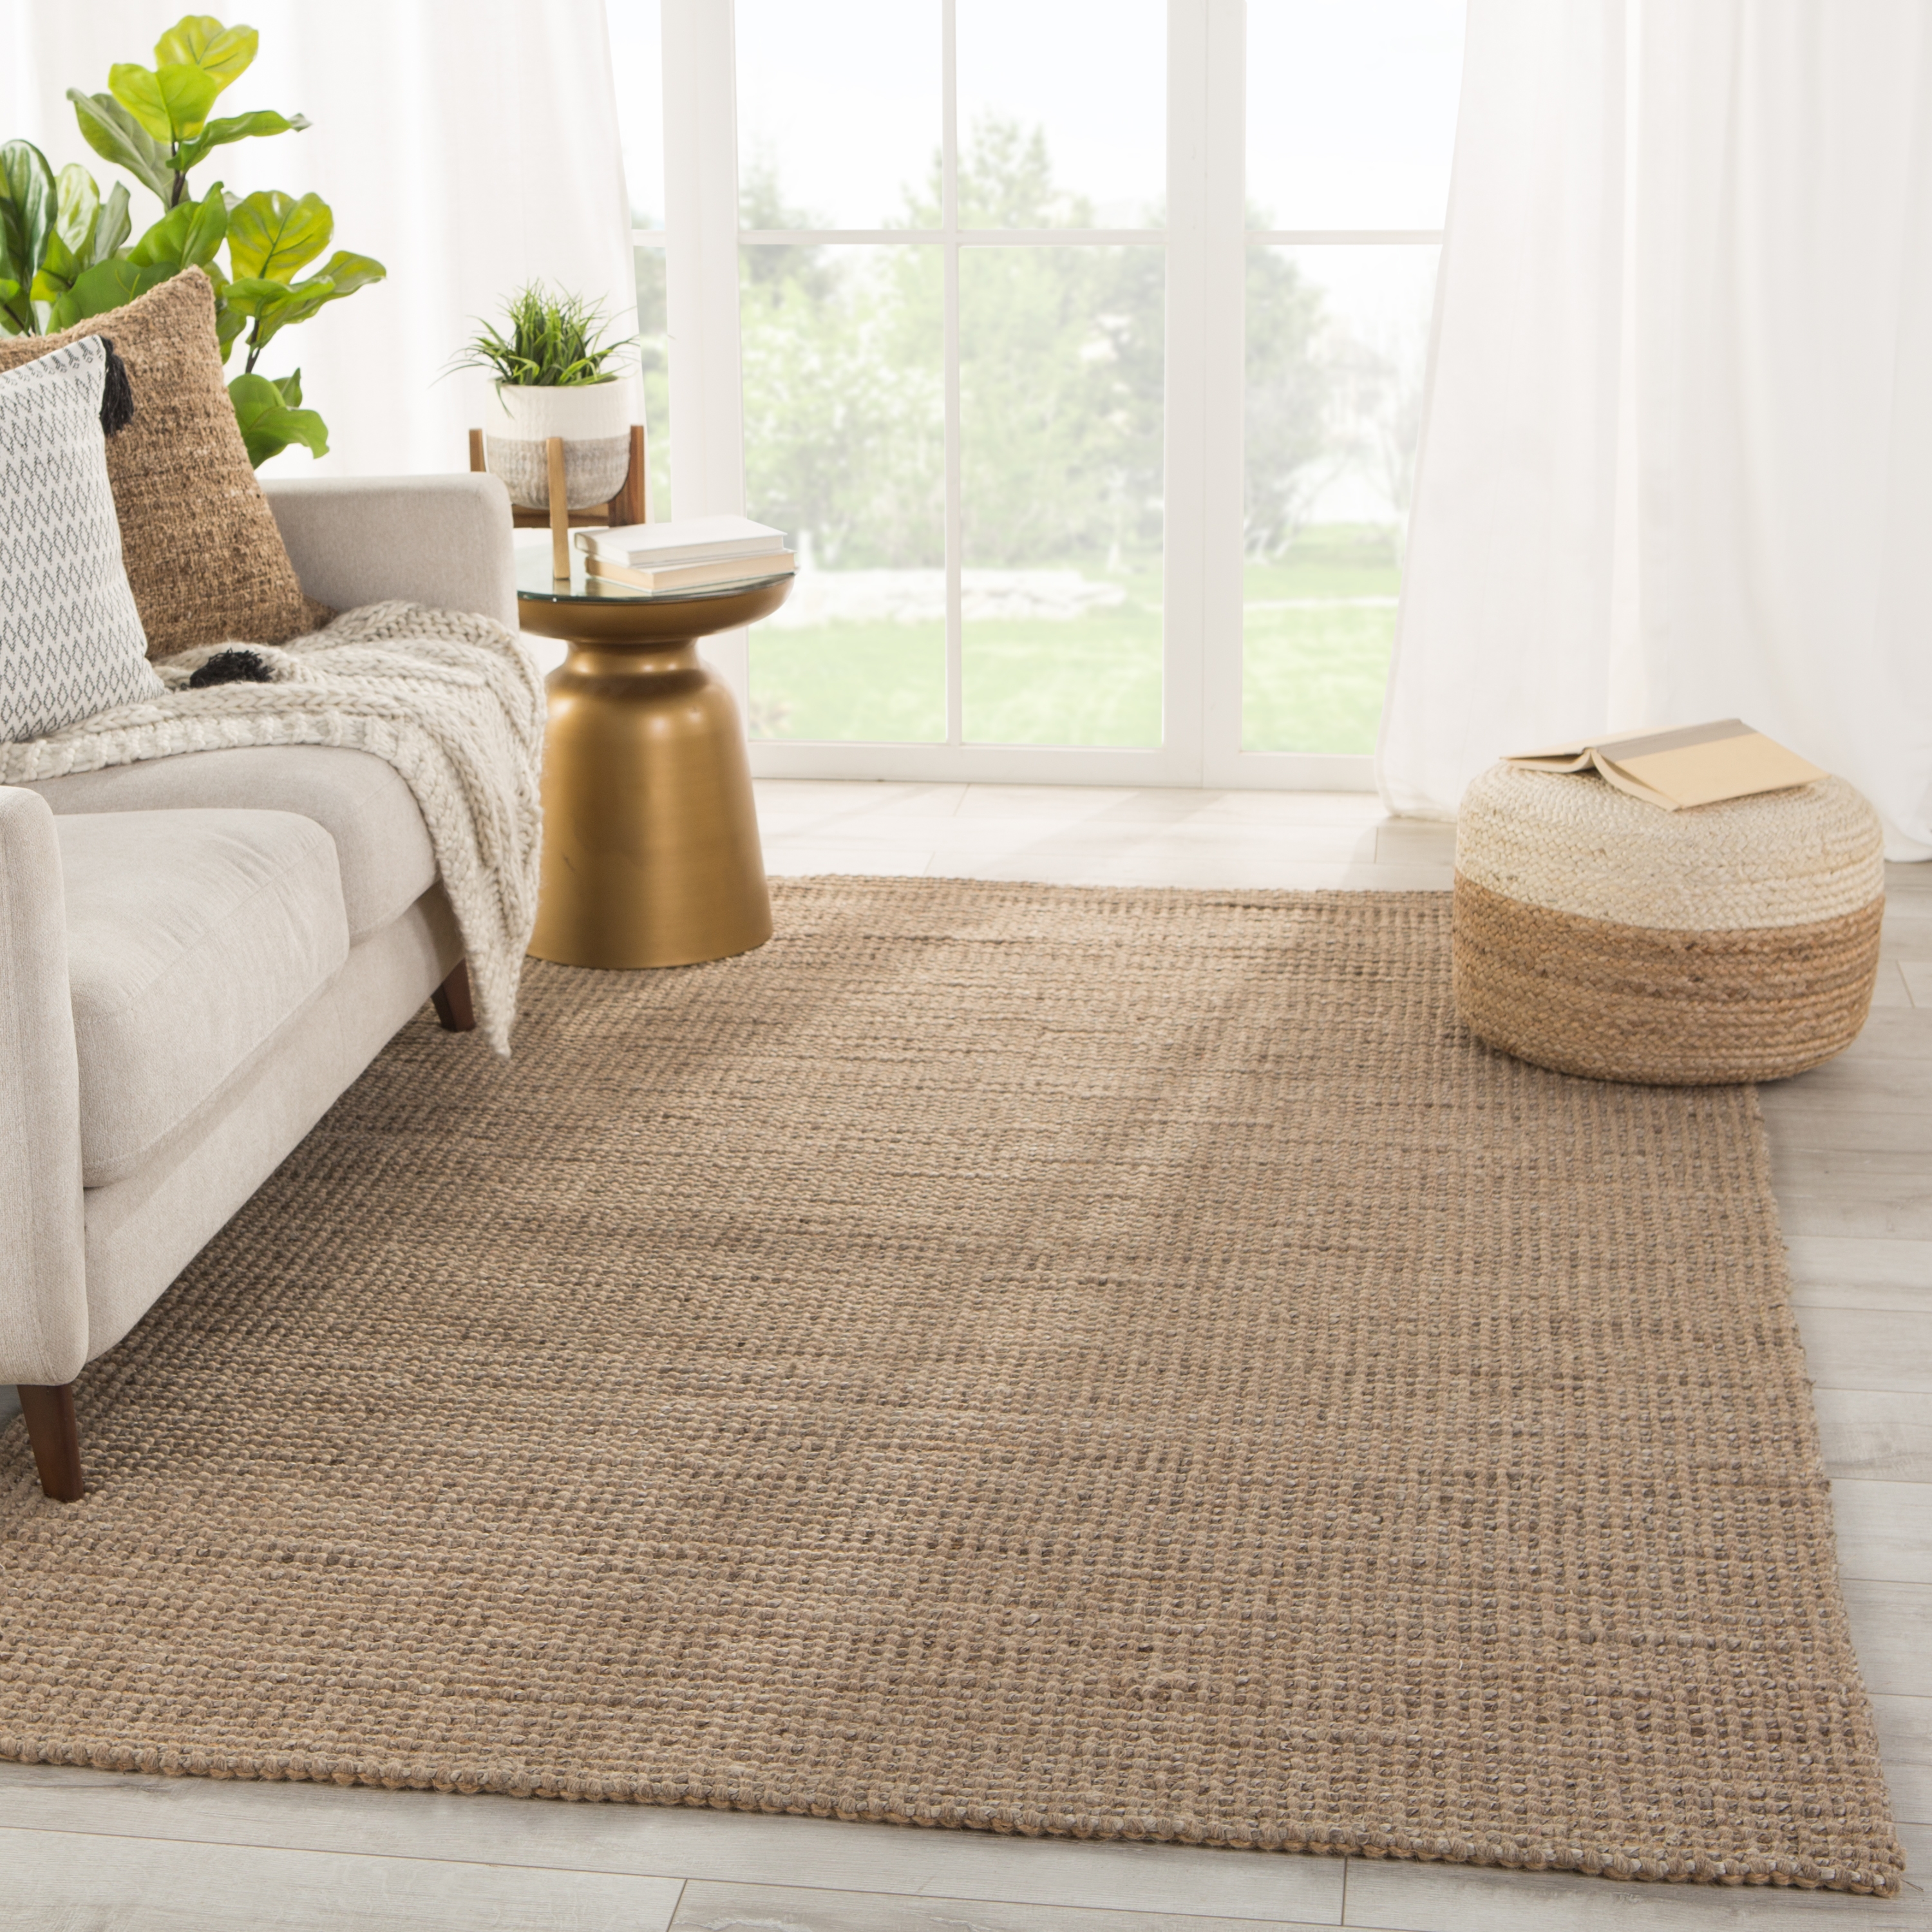 Beech Natural Solid Tan/ Taupe Area Rug (8'X10') - Image 4